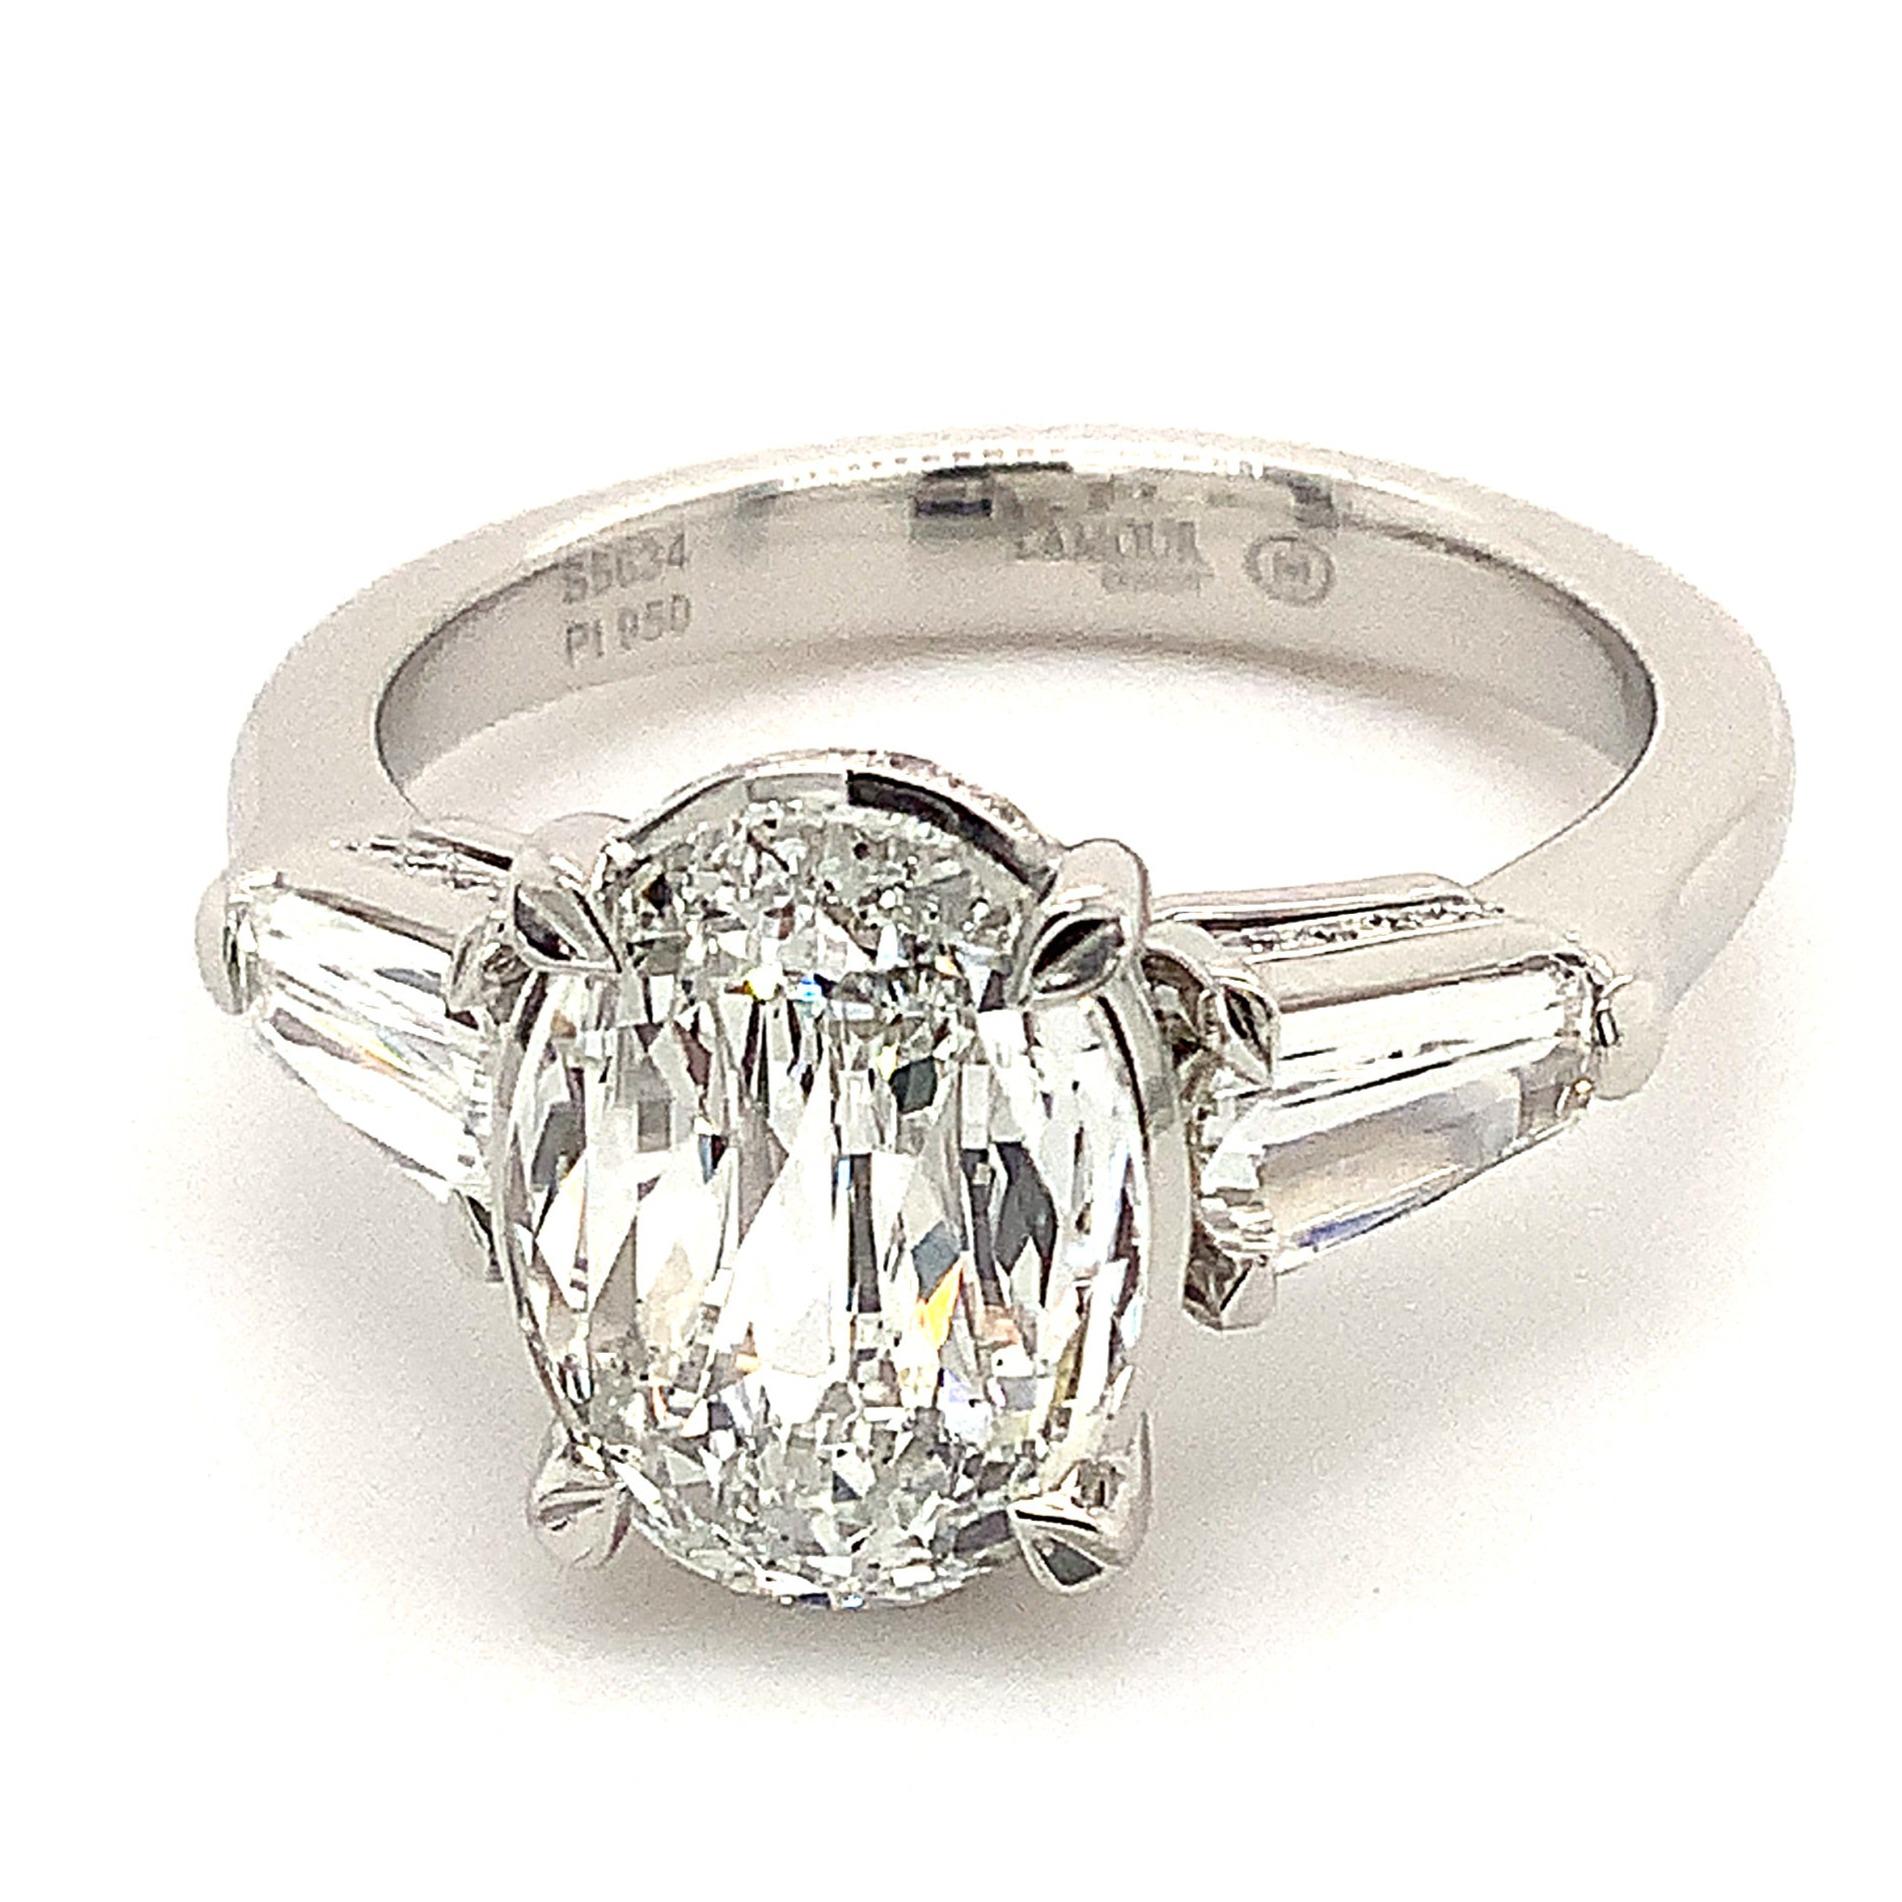  

The Christopher Designs L'Amour Crisscut® 2.01 ct Oval Classic Three Stone Diamond Ring Set in Platinum features a GIA Certified E Color SI 1 Clarity Oval Modified Brilliant Cut Center Stone of 10.26 x 7.63 x 3.13 mm,

laser inscribed L'Amour